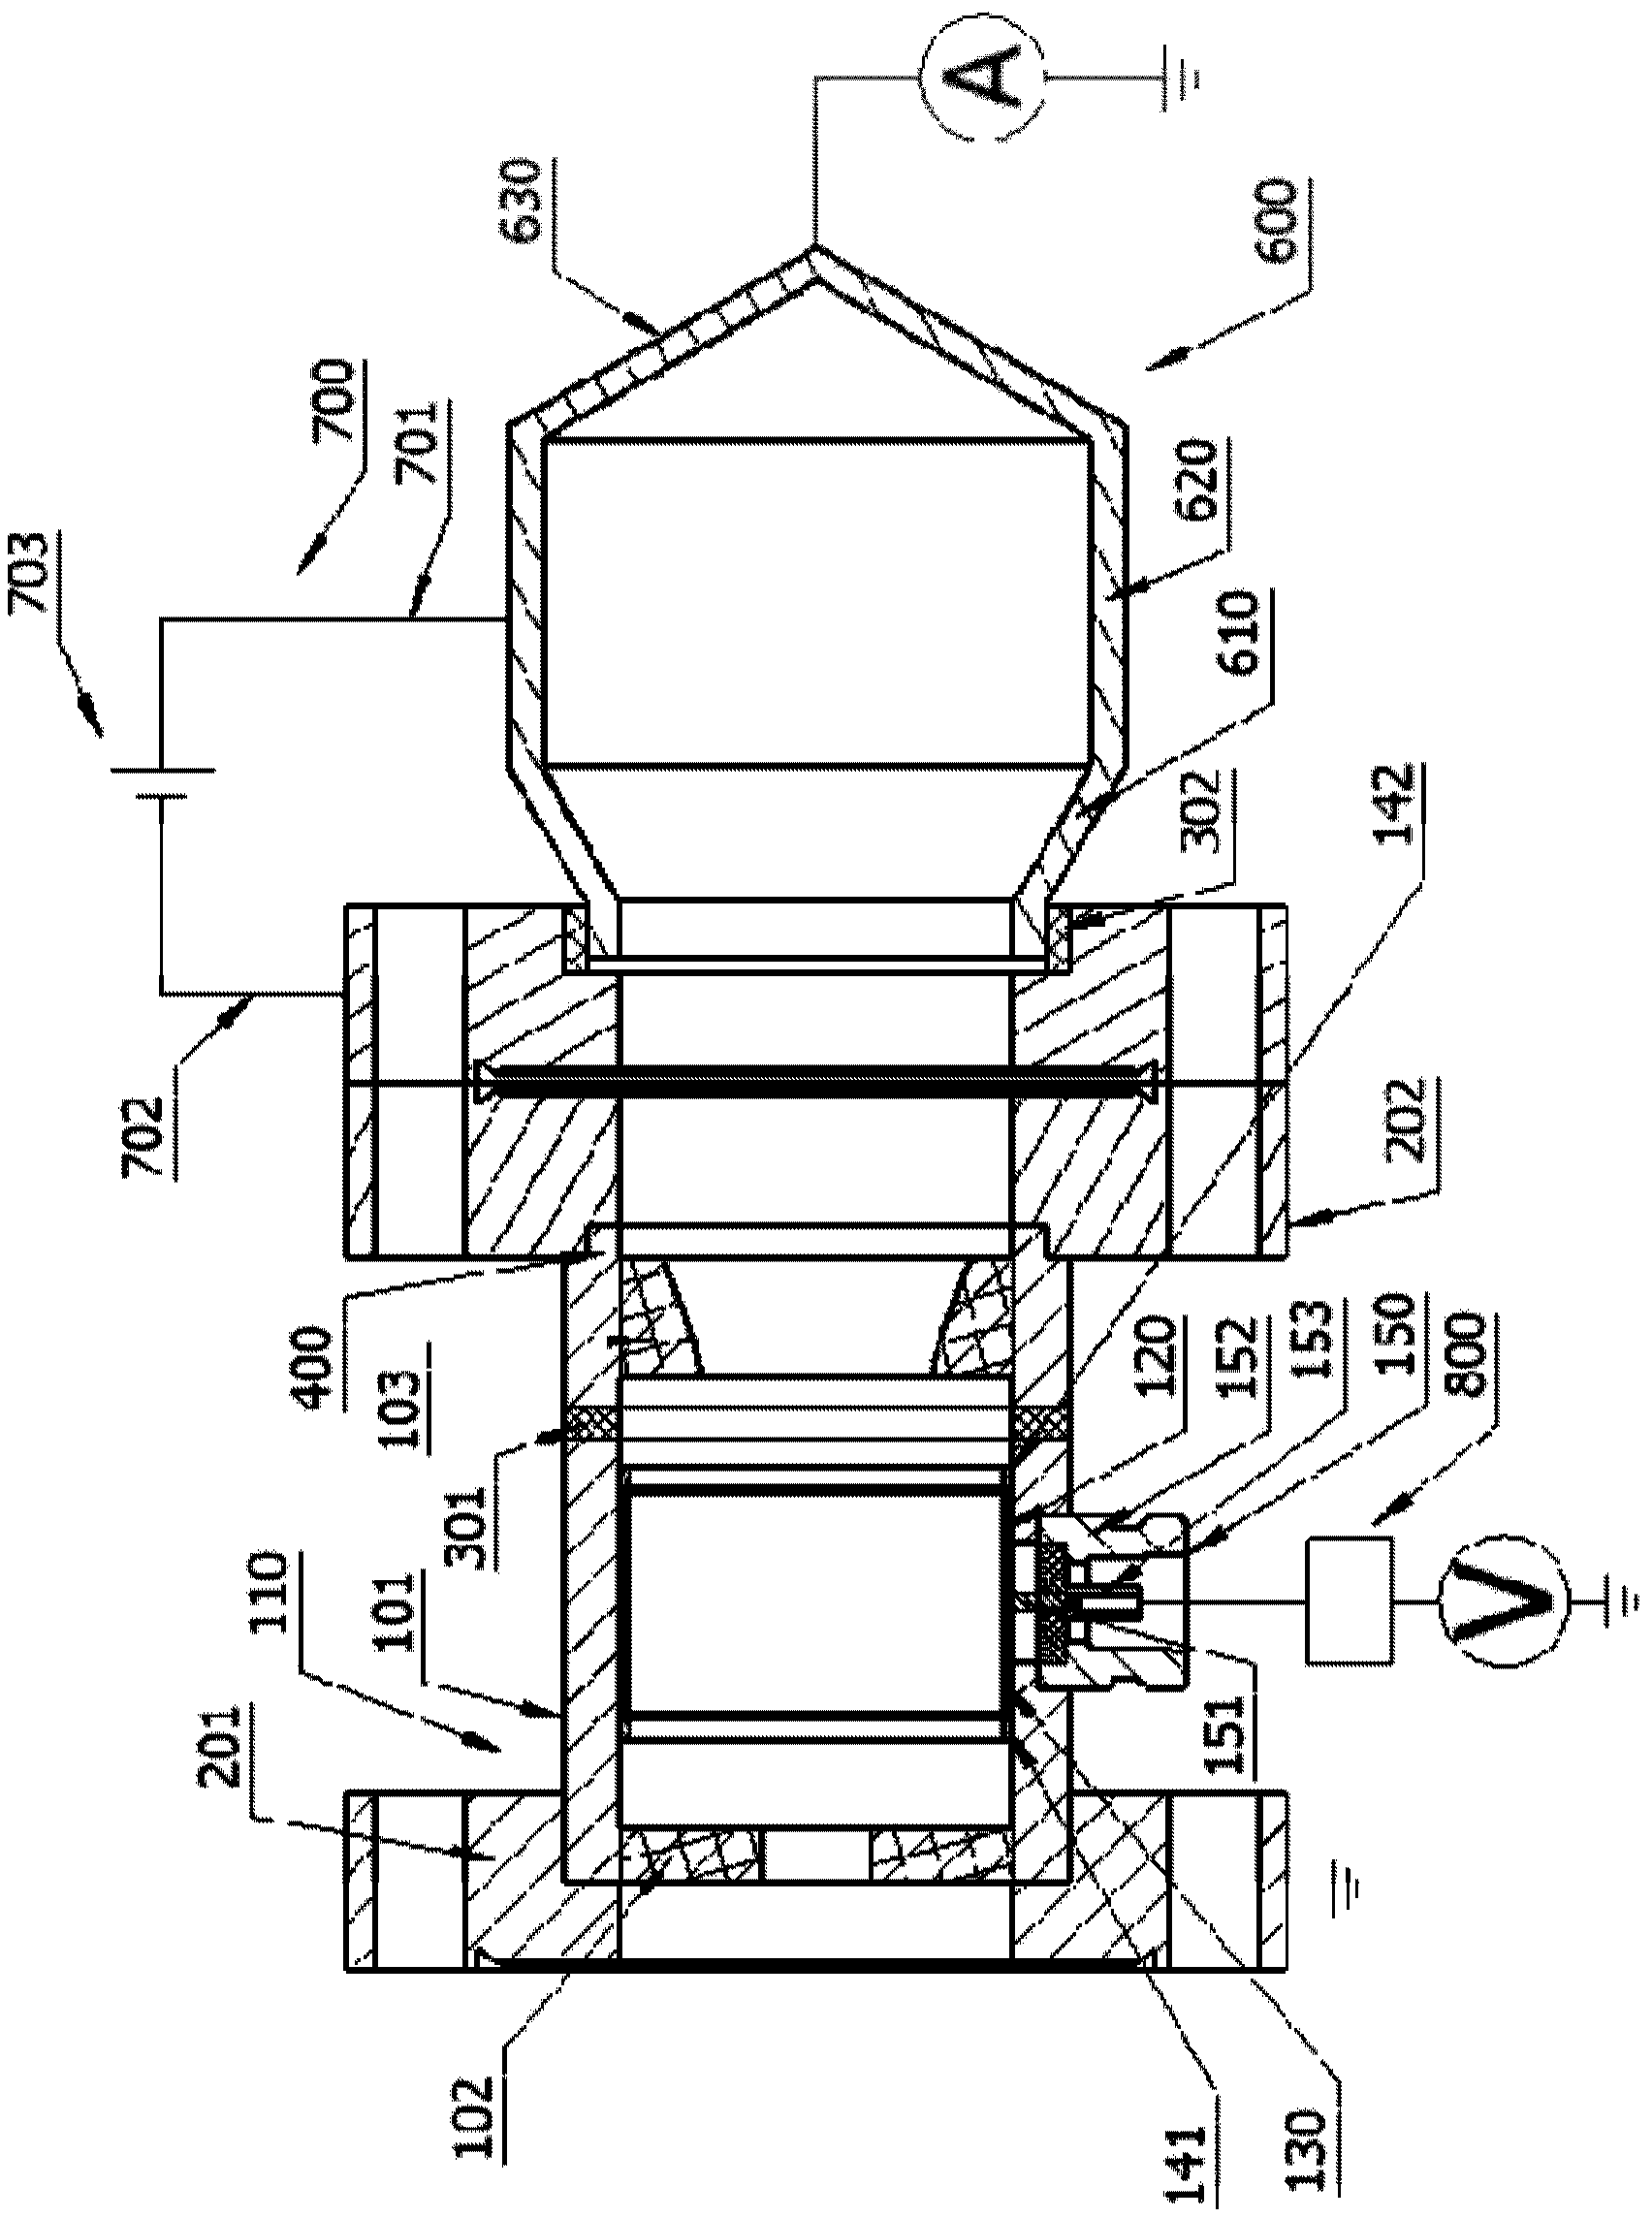 Electronic beam axial velocity measurement system